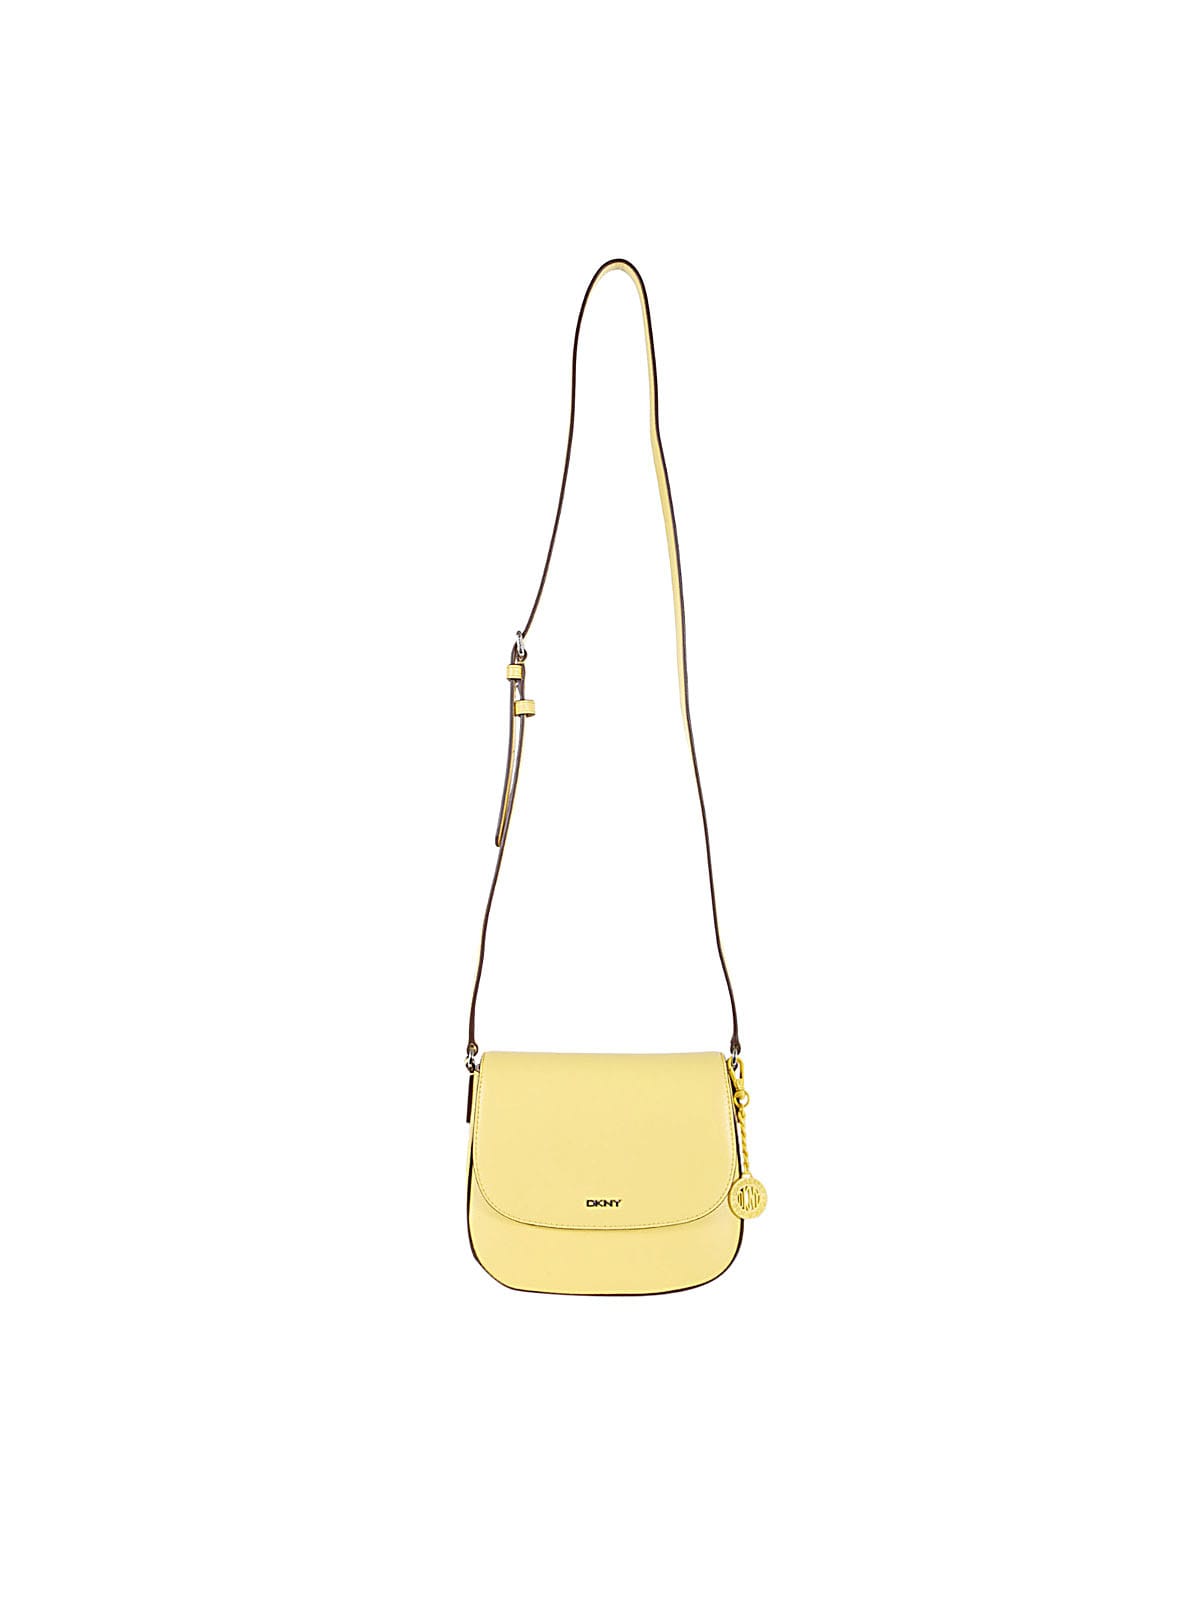 DKNY Bryant Leather Crossbody Bag in Yellow